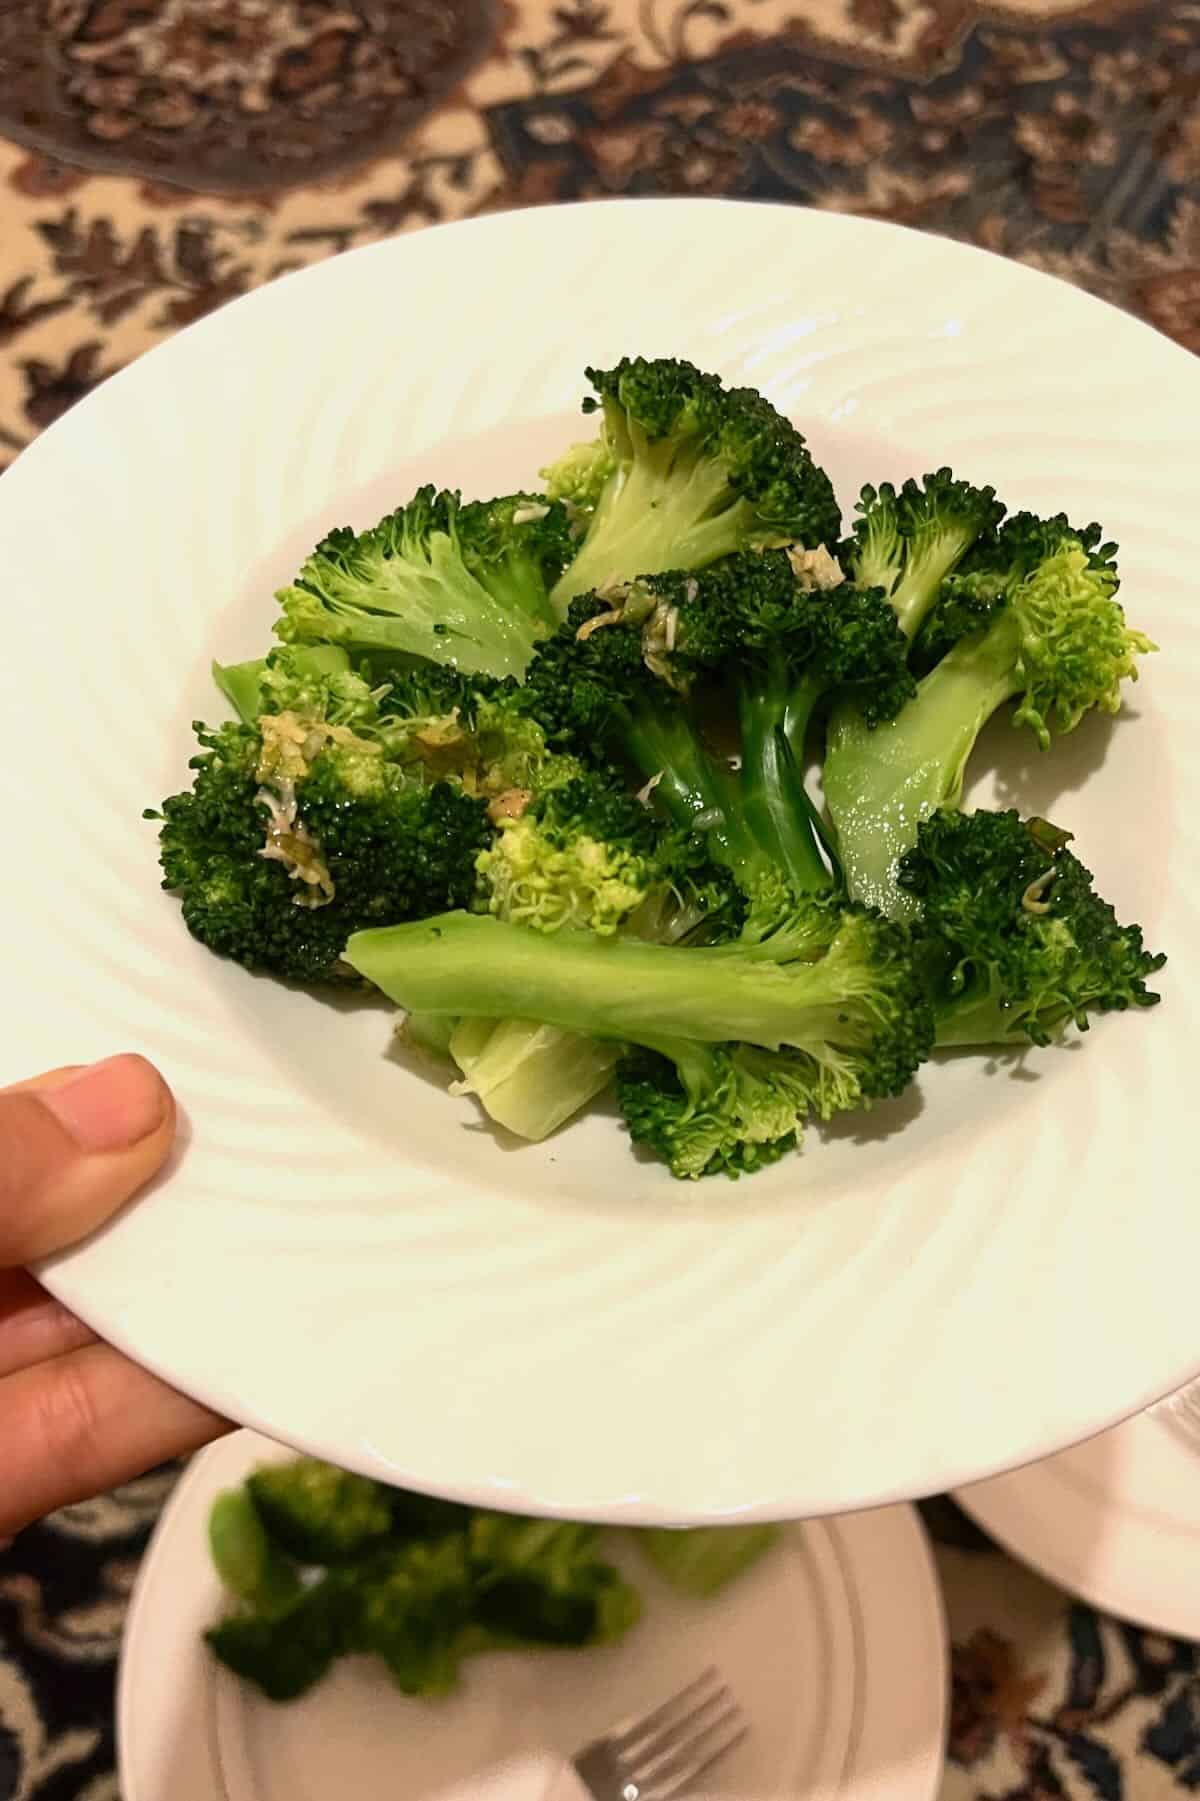 Blanched broccoli with lemon butter sauce